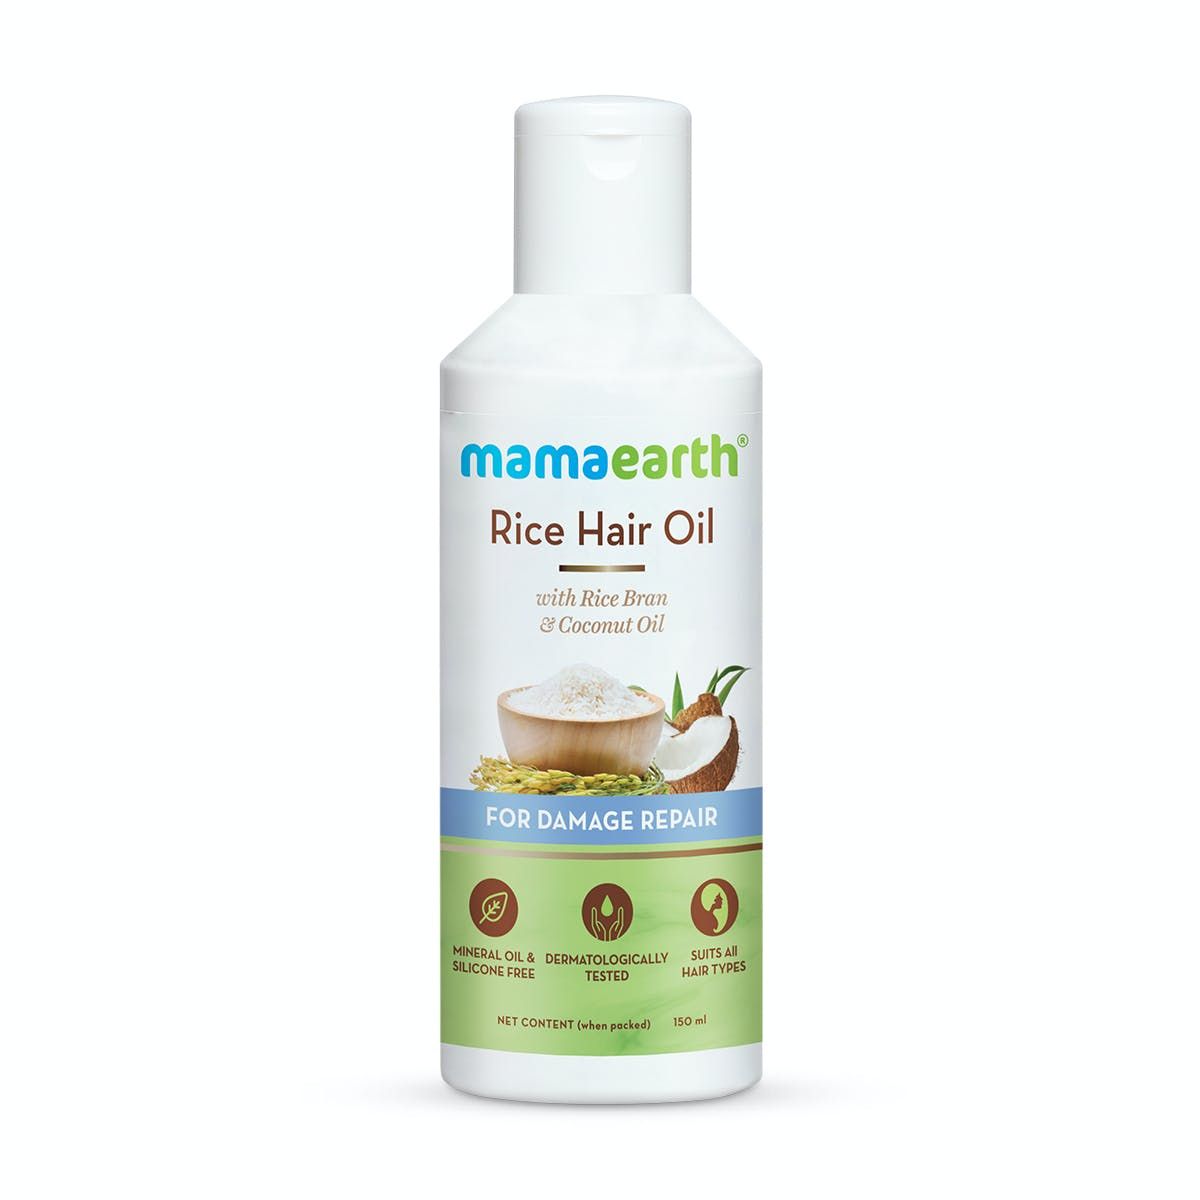 Mamaearth Rice Hair Oil With Rice Bran And Coconut Oil For Damage Repair, 150ml